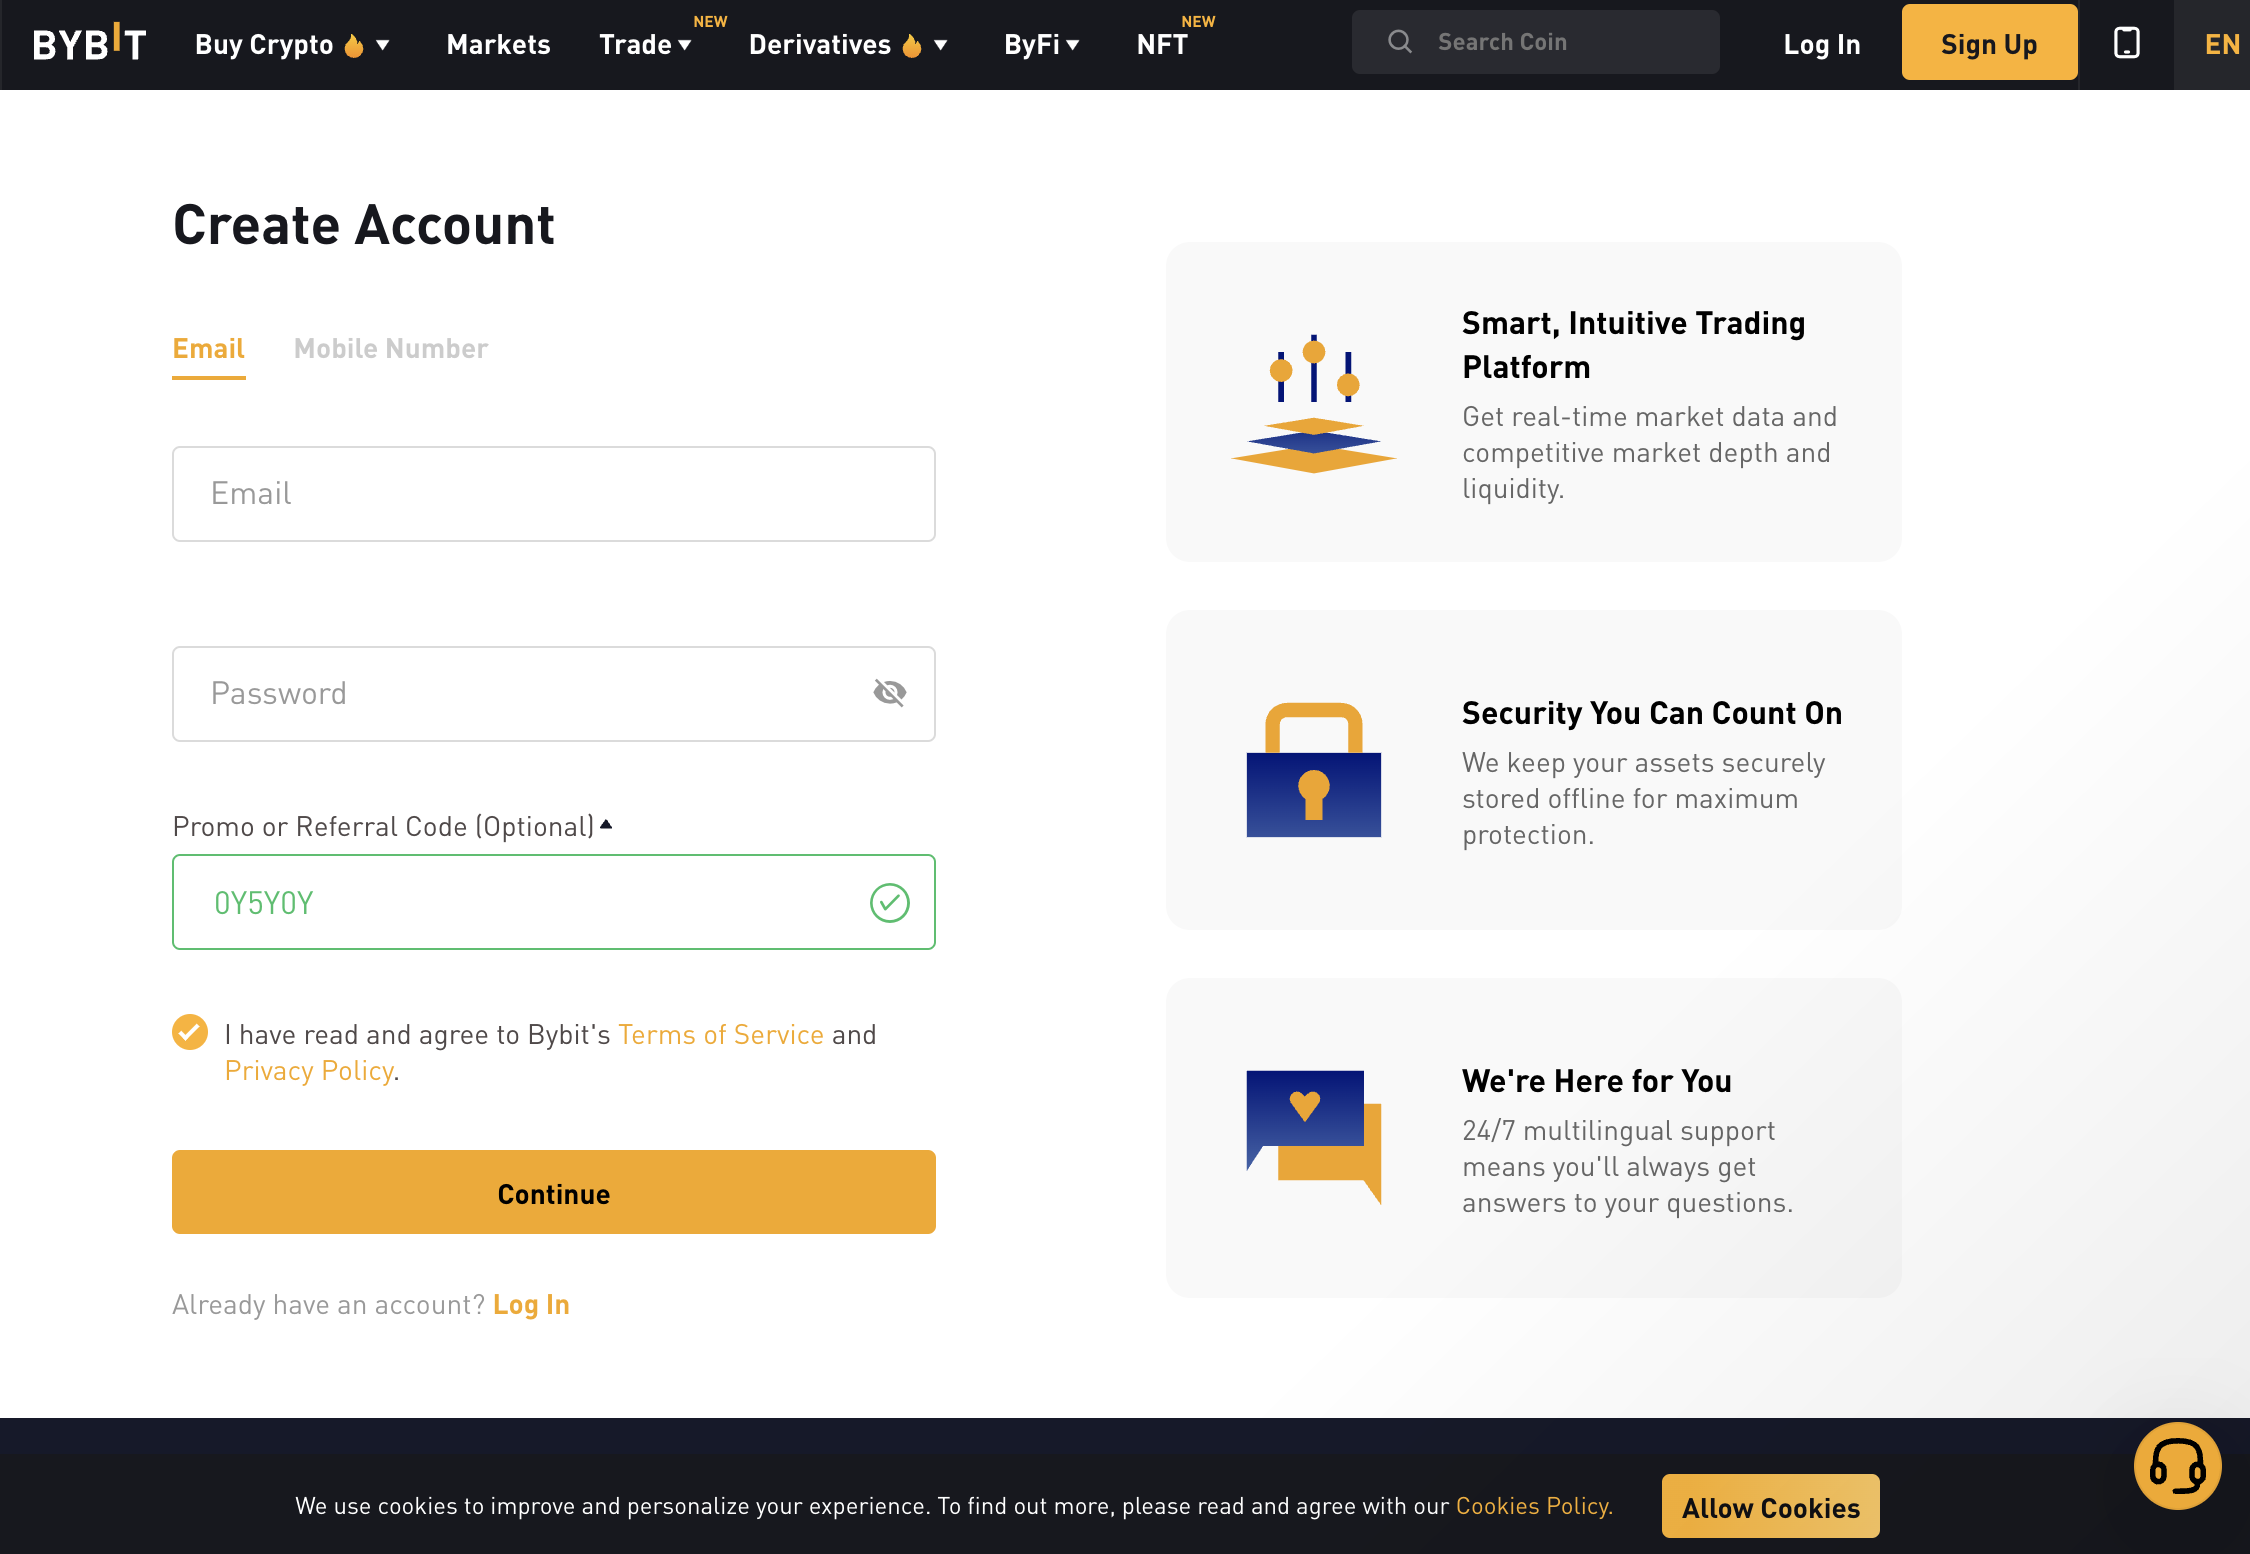 Open an account on the Bybit exchange